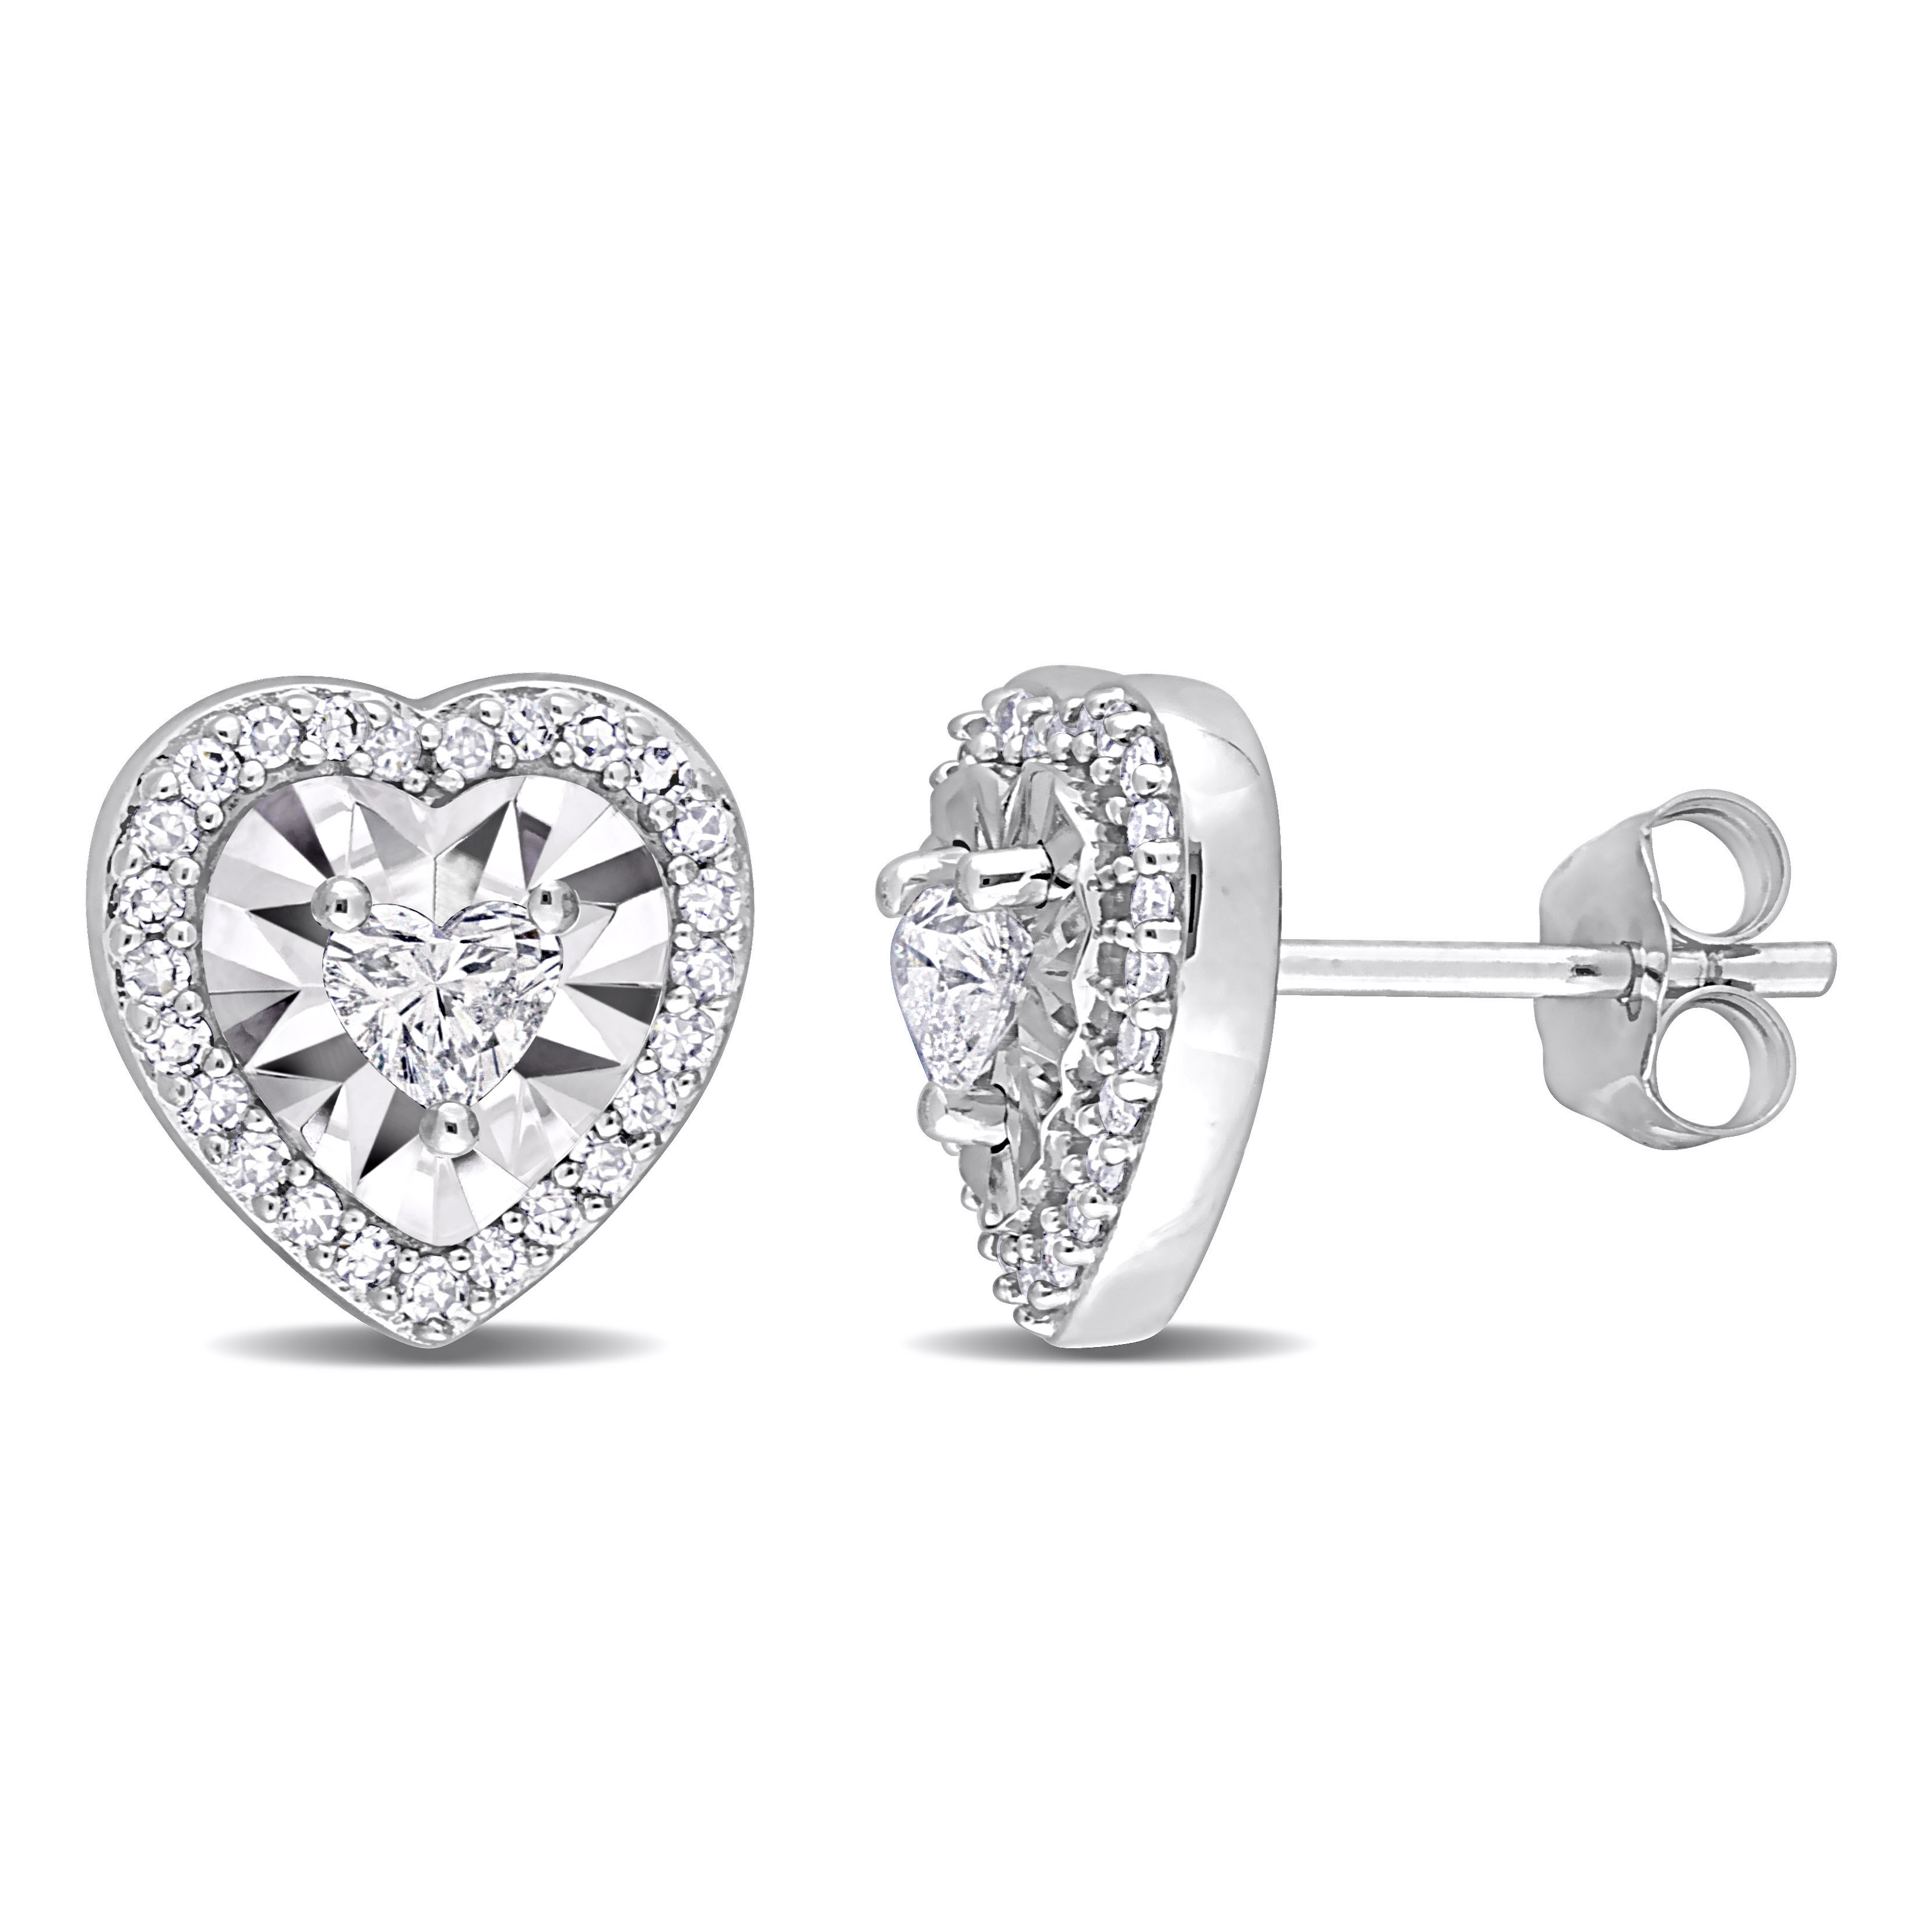 1/2 CT TW Heart and Round Diamonds Halo Stud Earrings in 14k White Gold